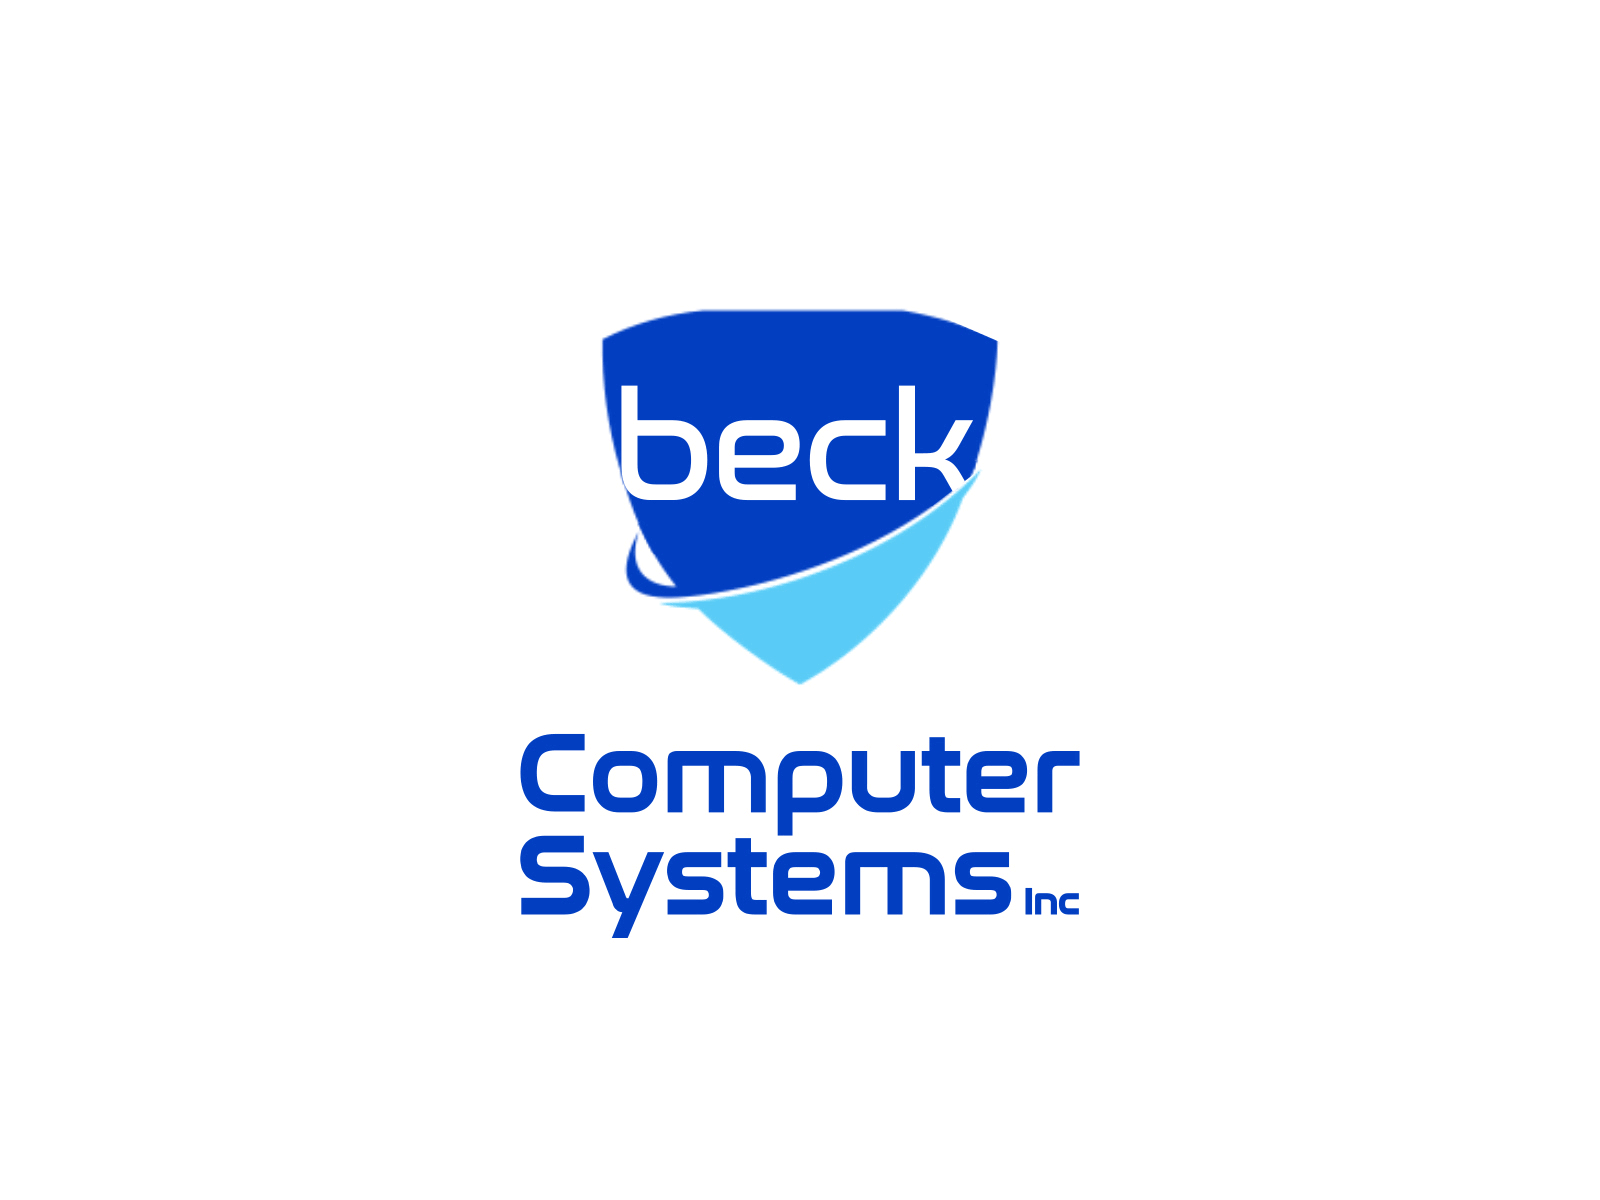 Beck Computers Logo Animation (Square Version) Motion Graphics animated gif animated logo animation beck computers branding design graphics design logo logo animation motion graphics unique logo animation